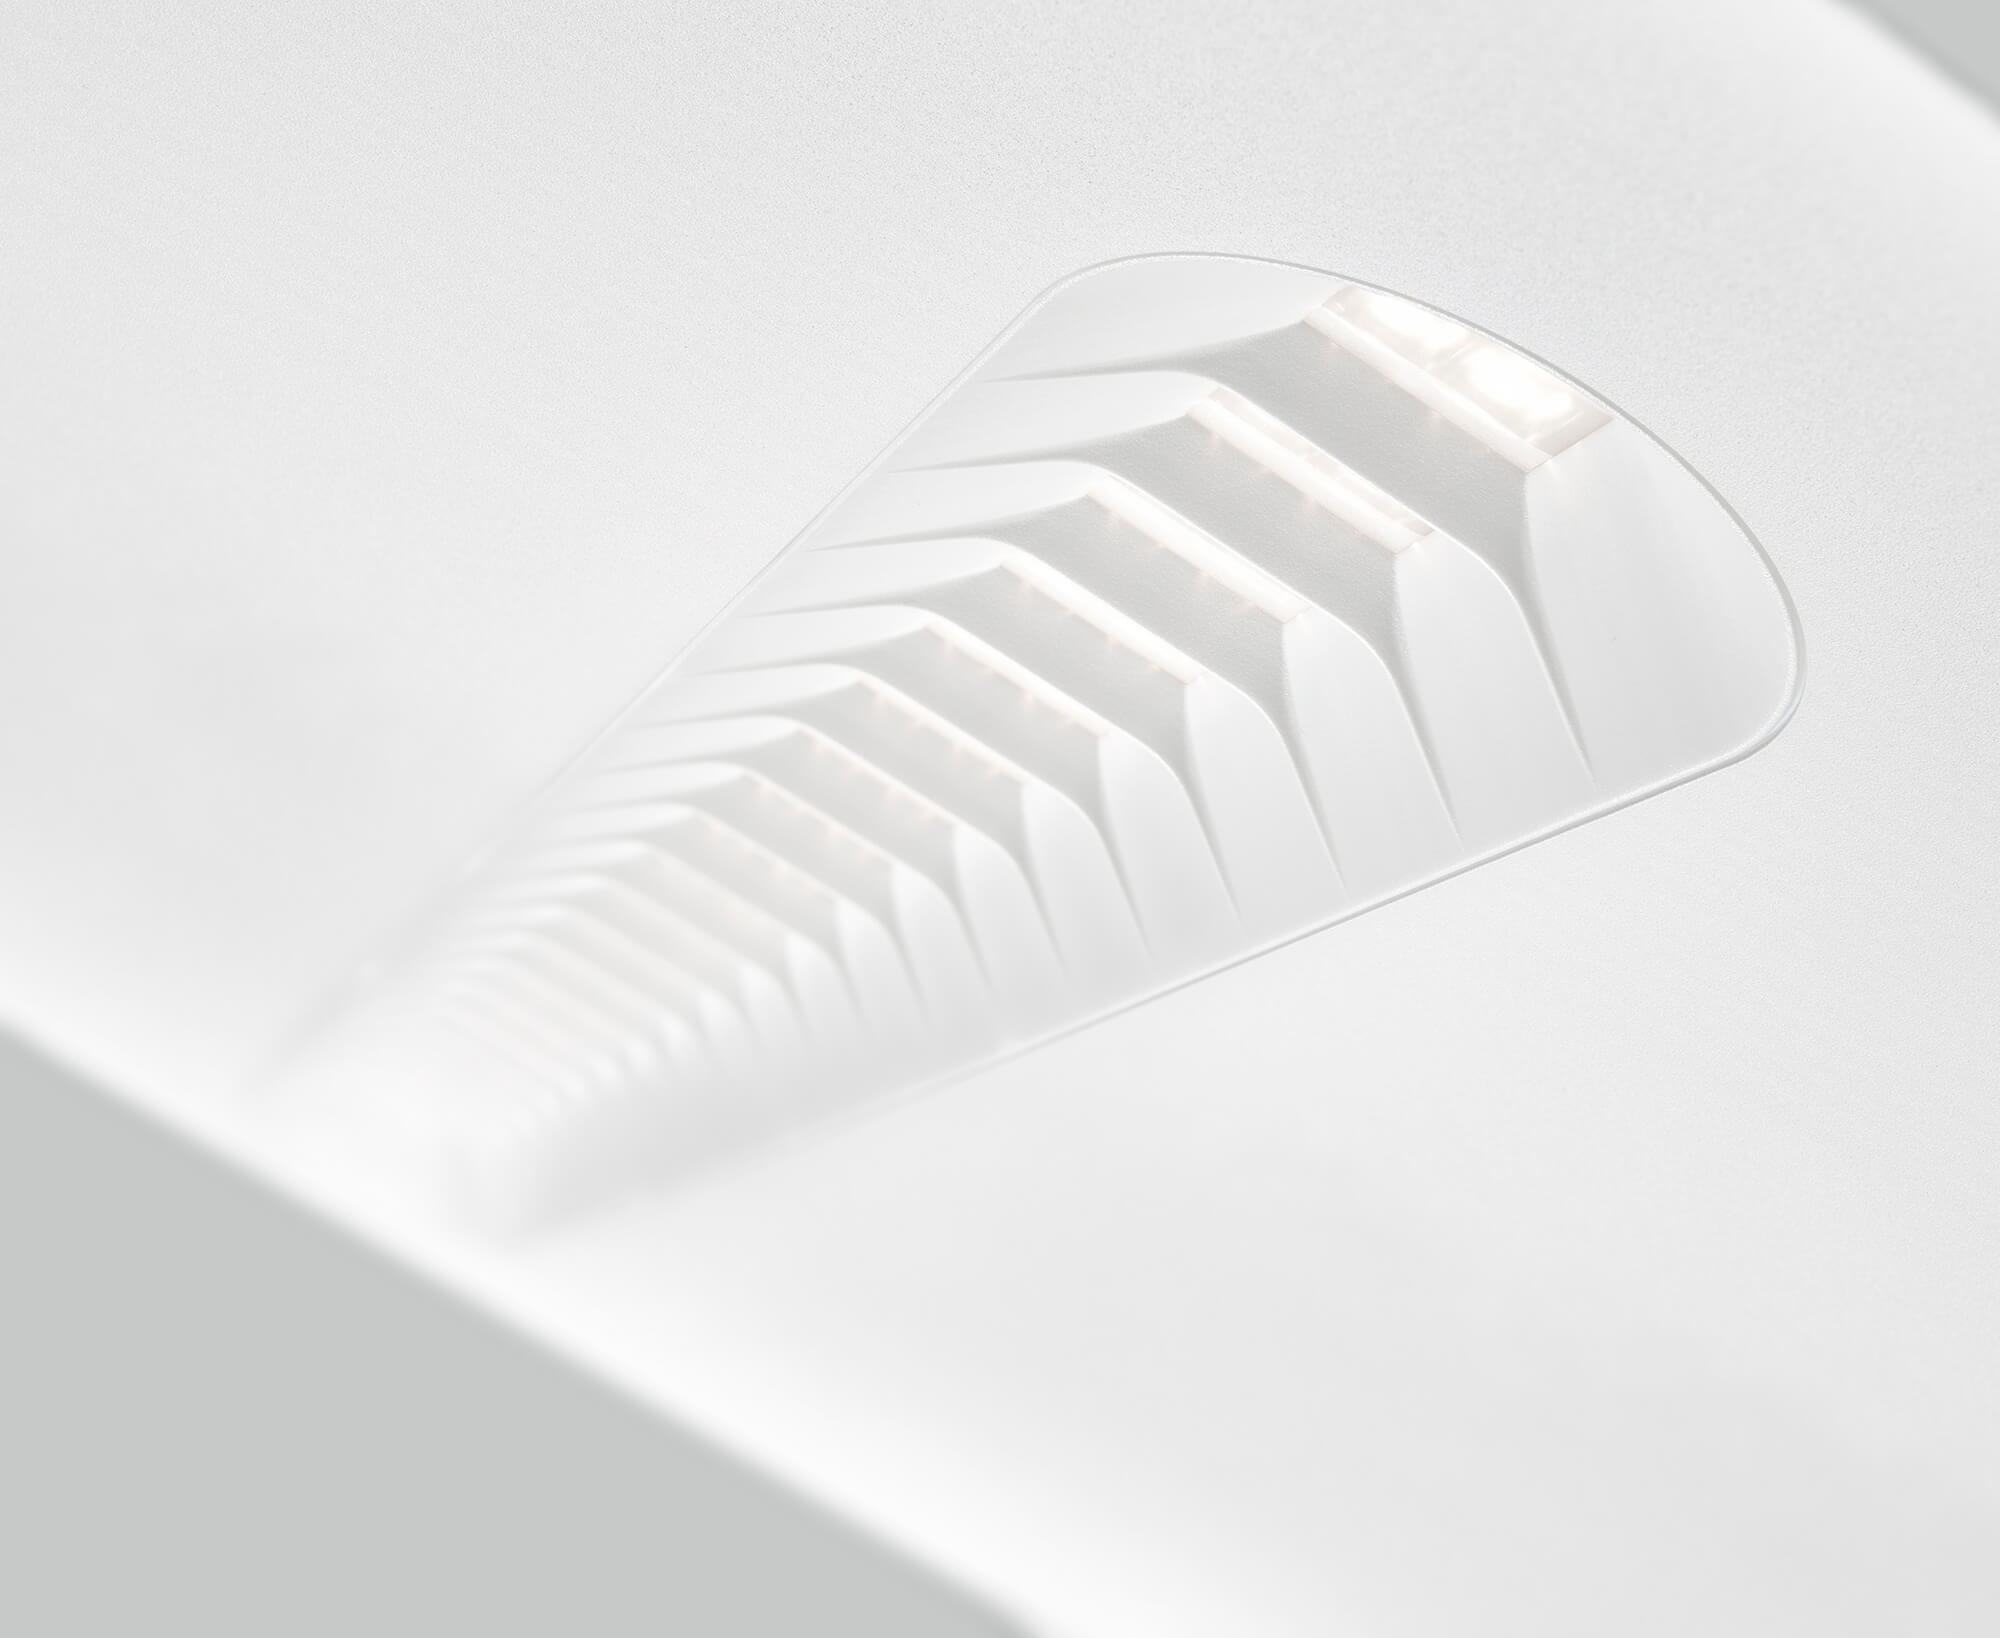 ETAP luminaires excel with their high efficiency, long service life and outstanding maintenance factor.